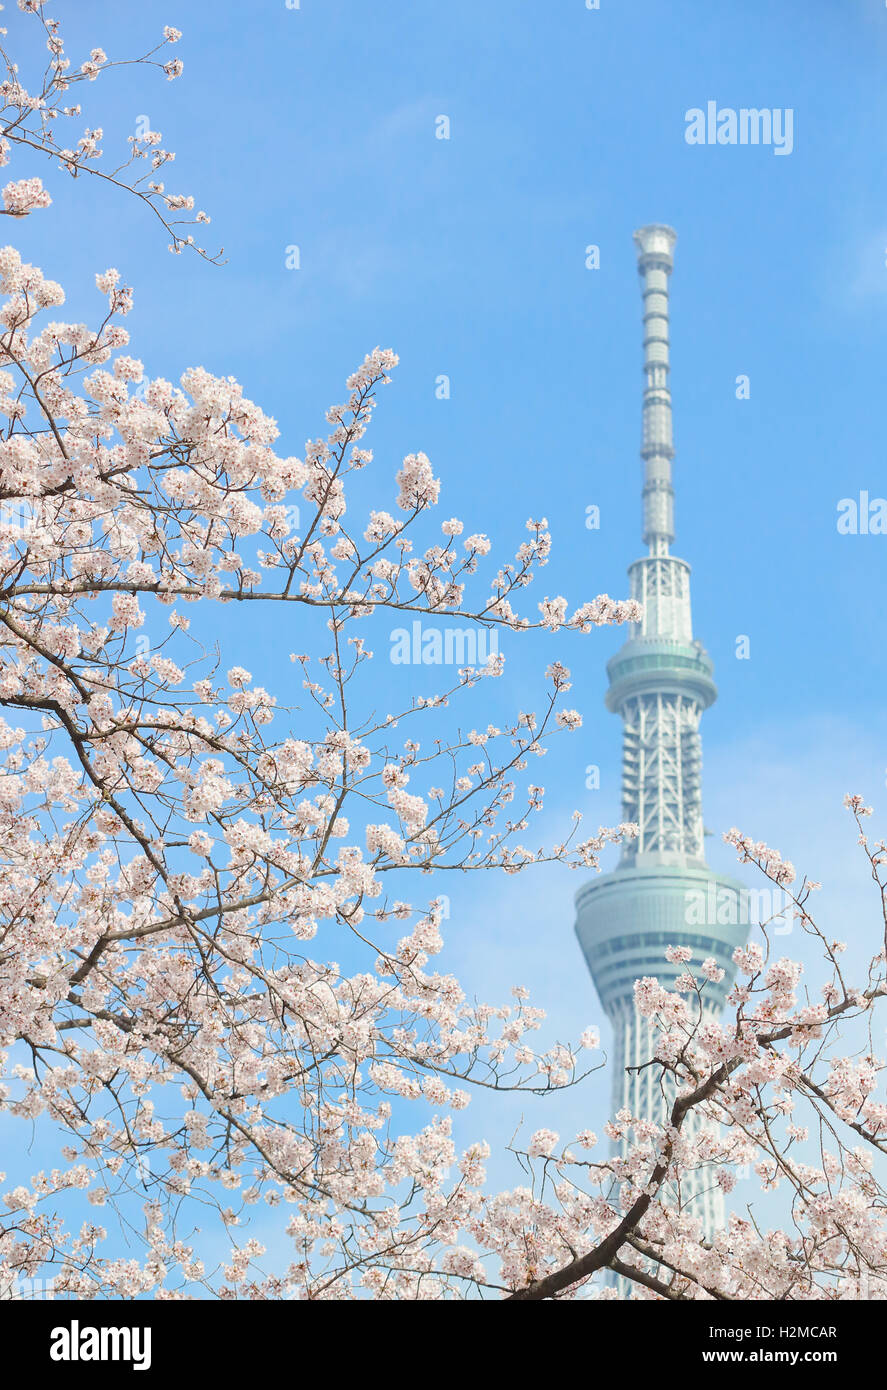 Cherry blossoms and Skytree tower Stock Photo